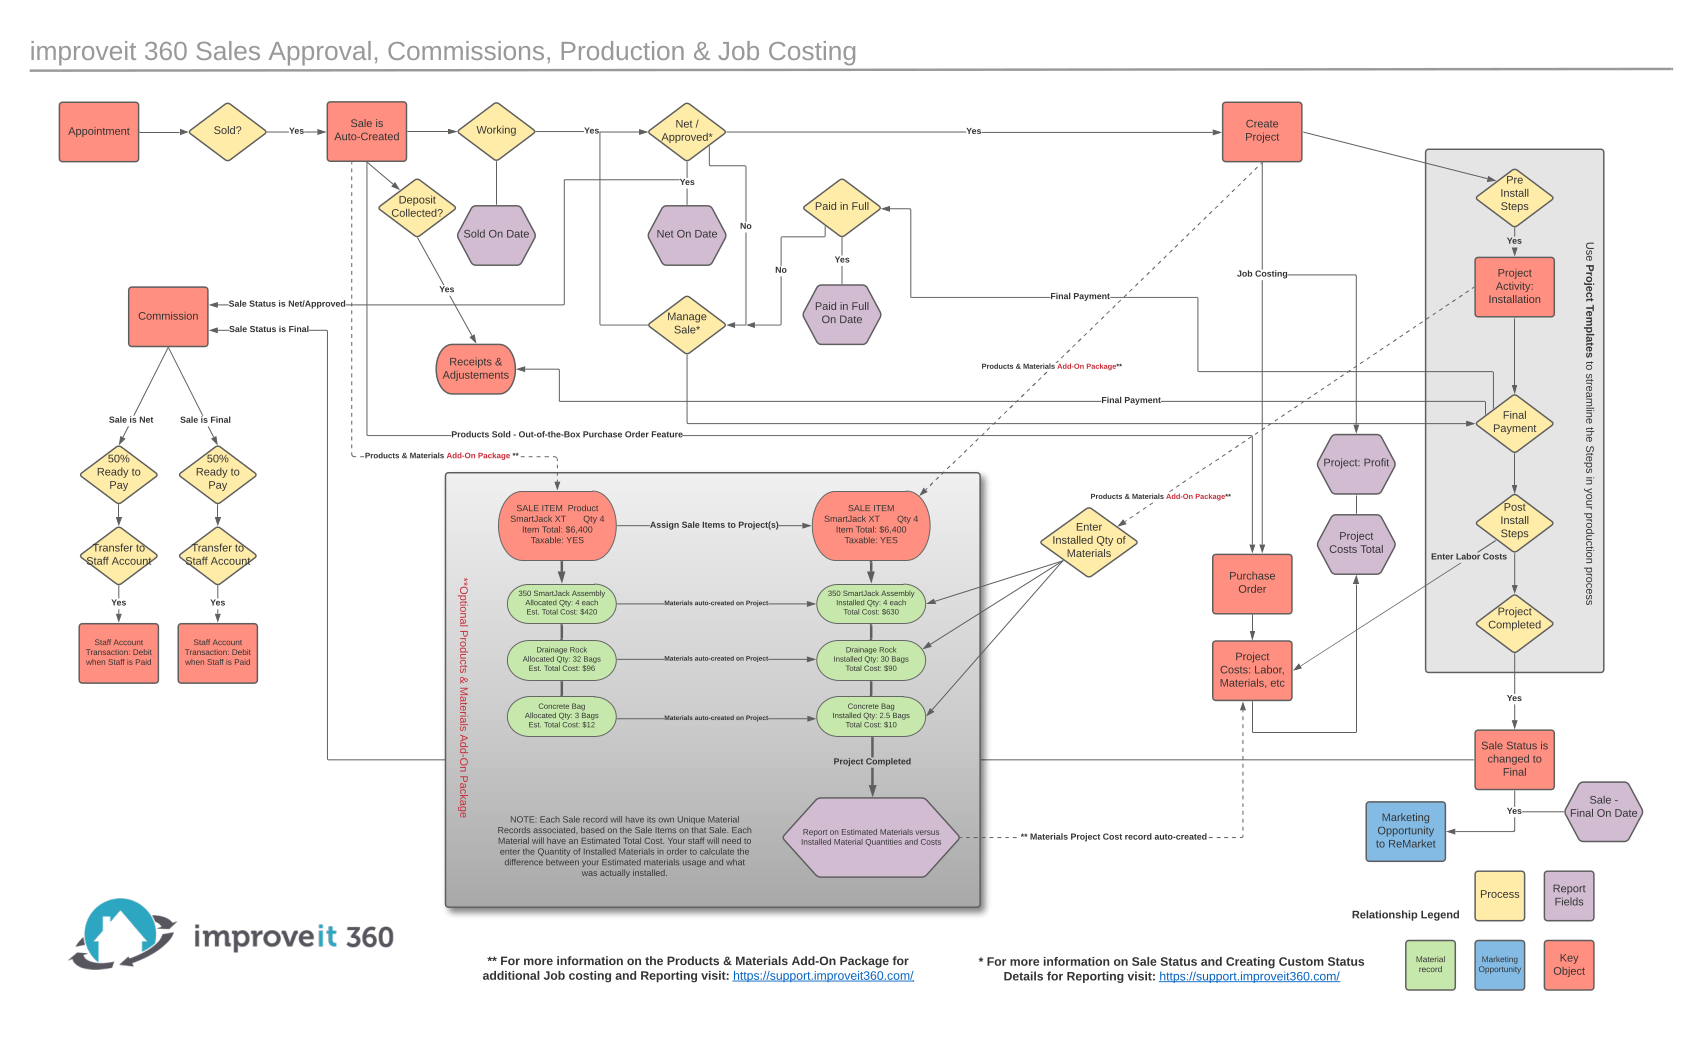 Sales Approval, Production and Job Costing Process Diagram – improveit! 360